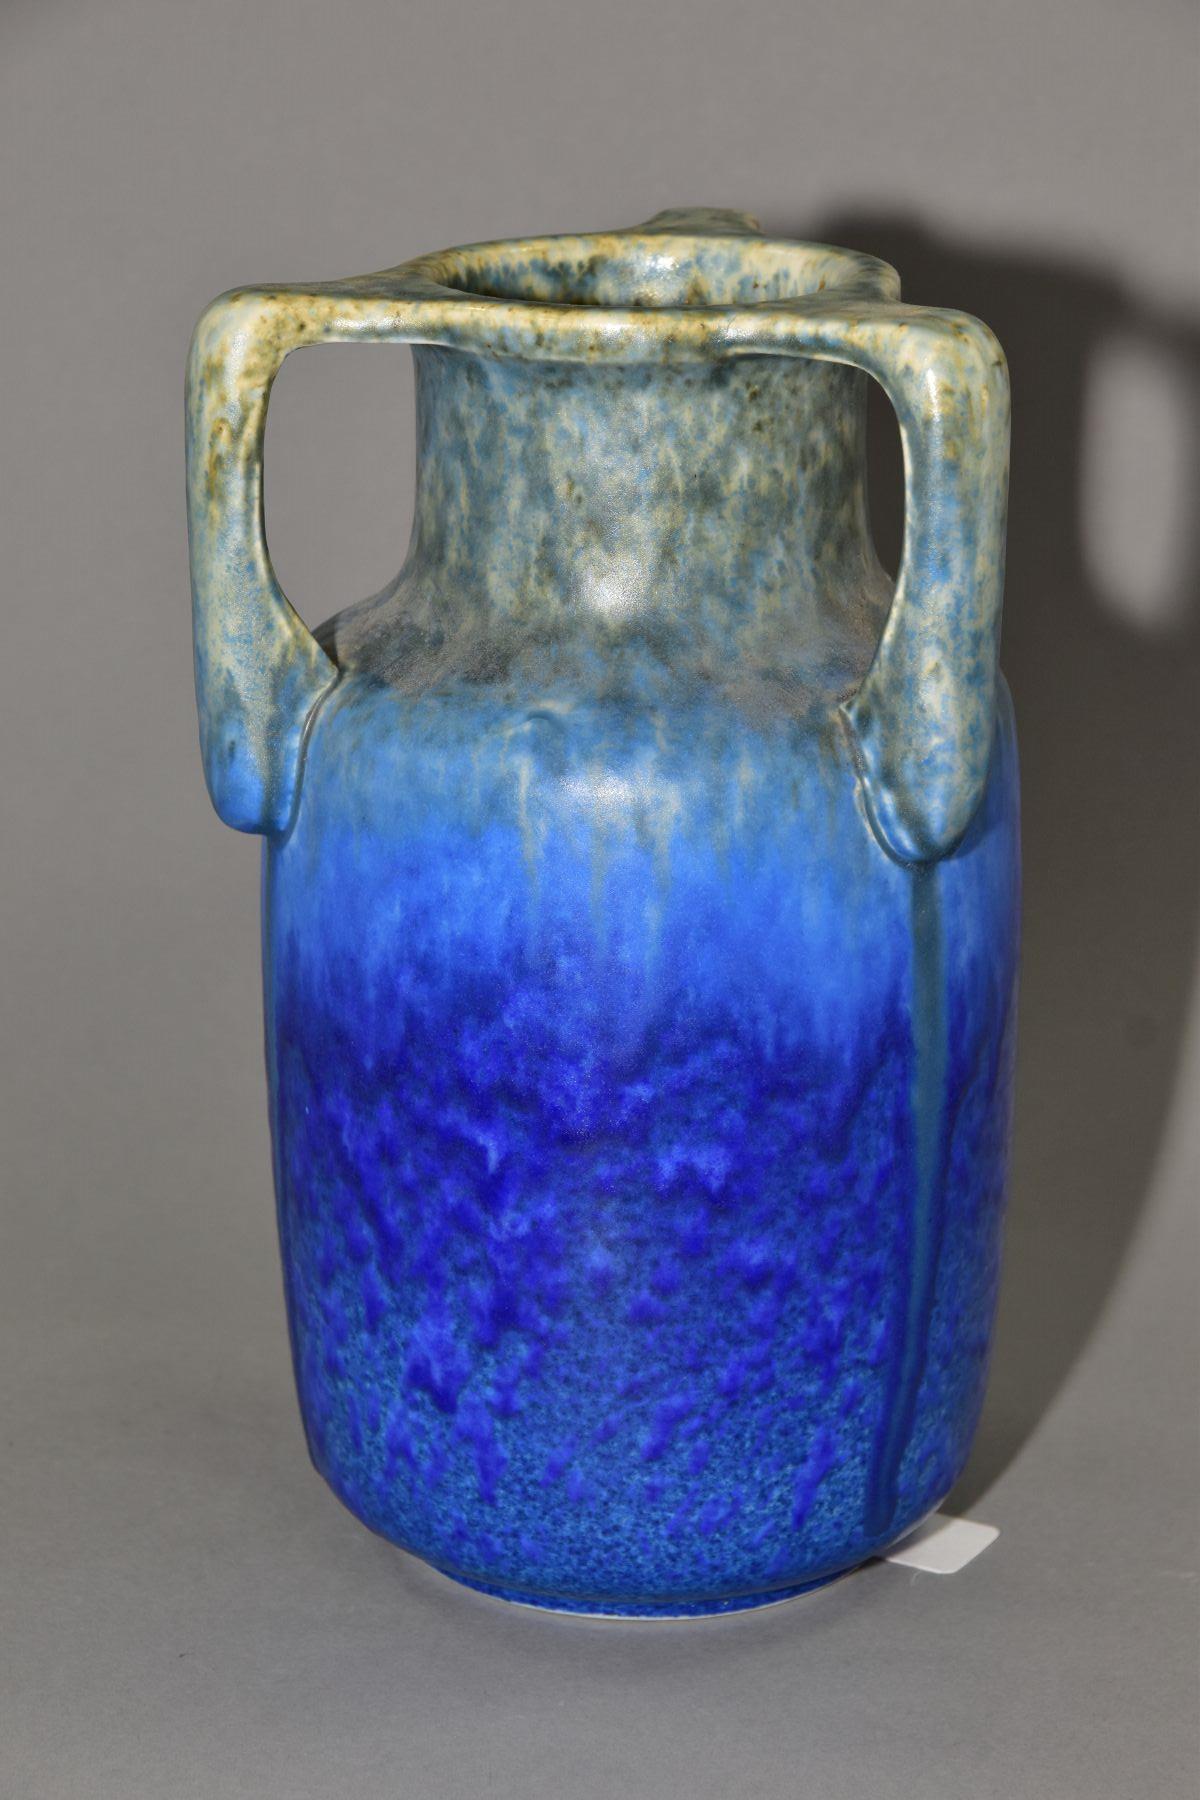 RUSKIN POTTERY, a three handled bottle shaped vase, mottled green fading to blue glaze, inscribed W. - Image 6 of 6